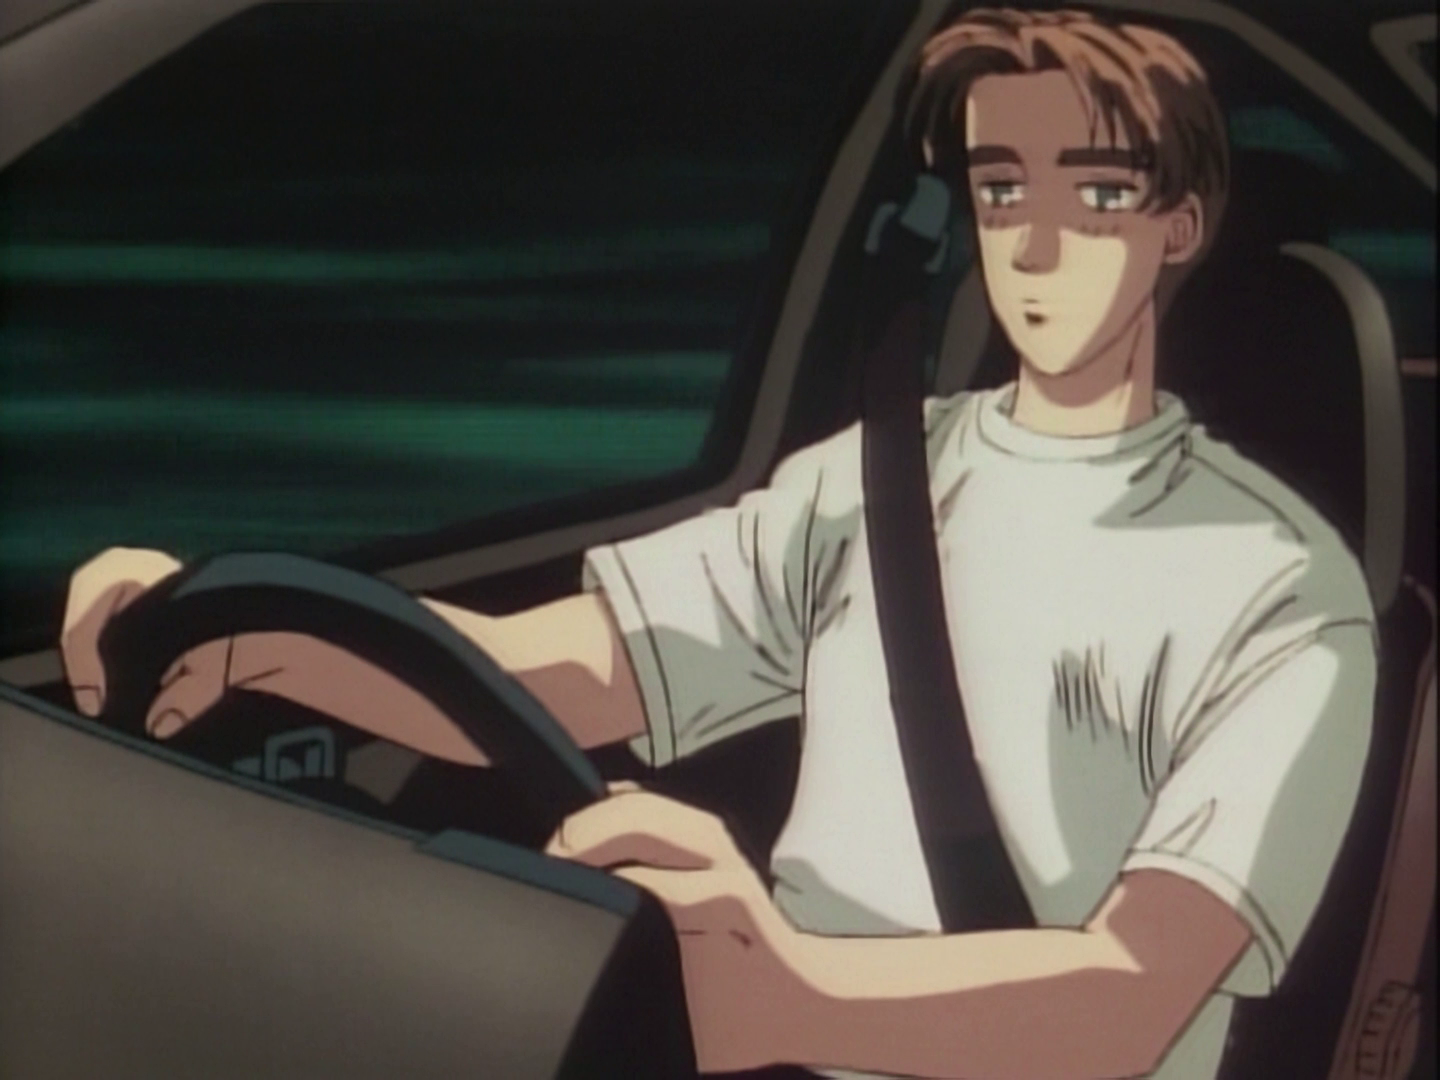 Takumi Fujiwara Initial D Wiki Fandom He essentially becomes the second protagonist of initial d after project d is founded and he and takumi become its double aces. takumi fujiwara initial d wiki fandom